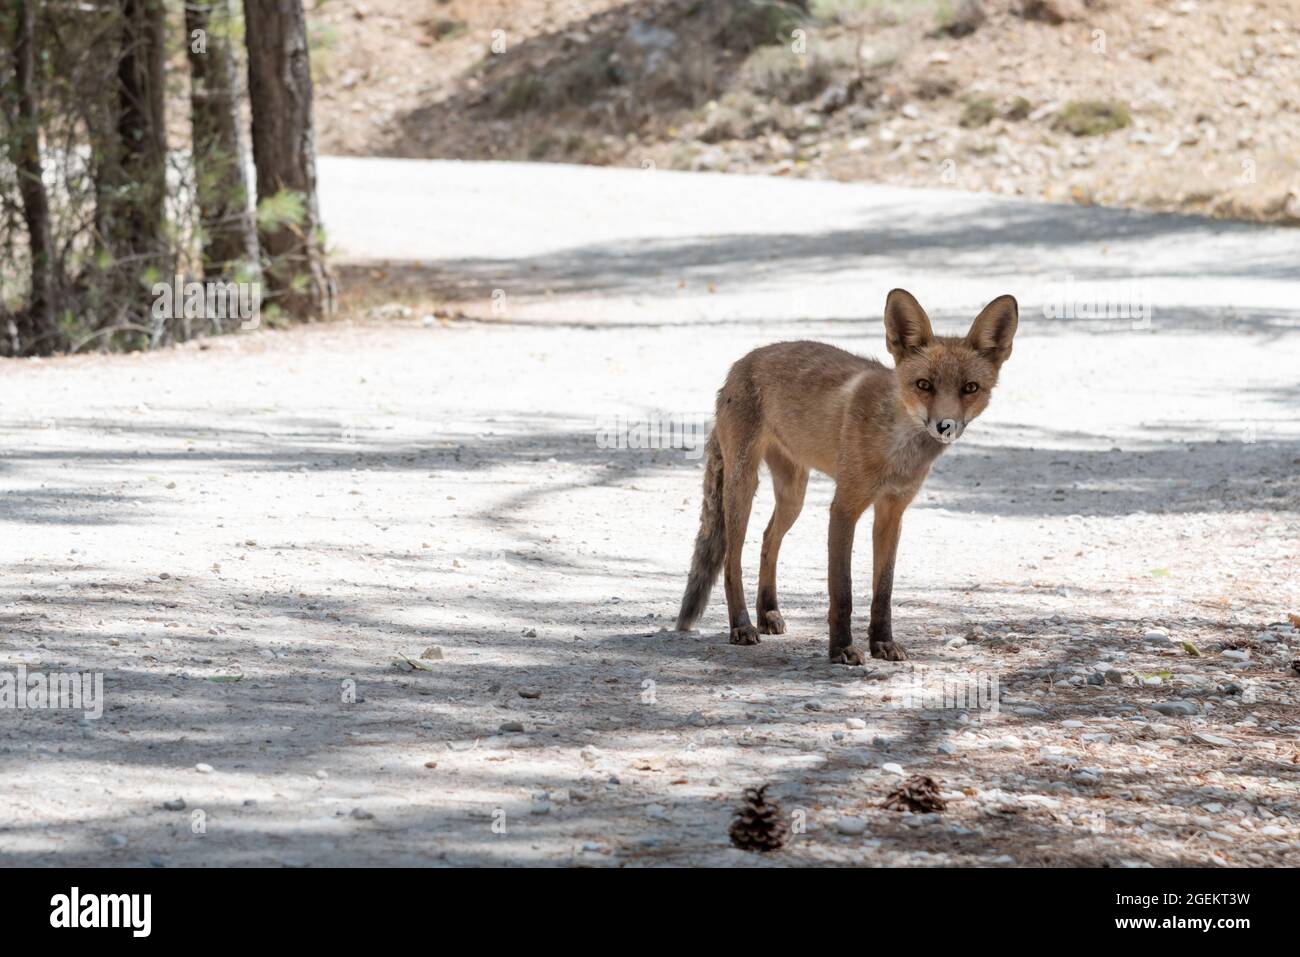 Fox on a path in the Sierra de Cazorla, waiting to be fed by a tourist. Stock Photo